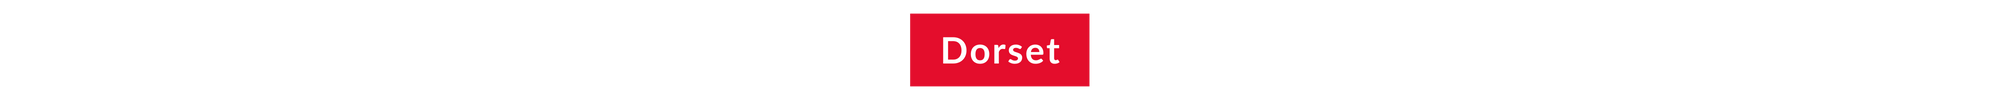 The word Dorset in a red block